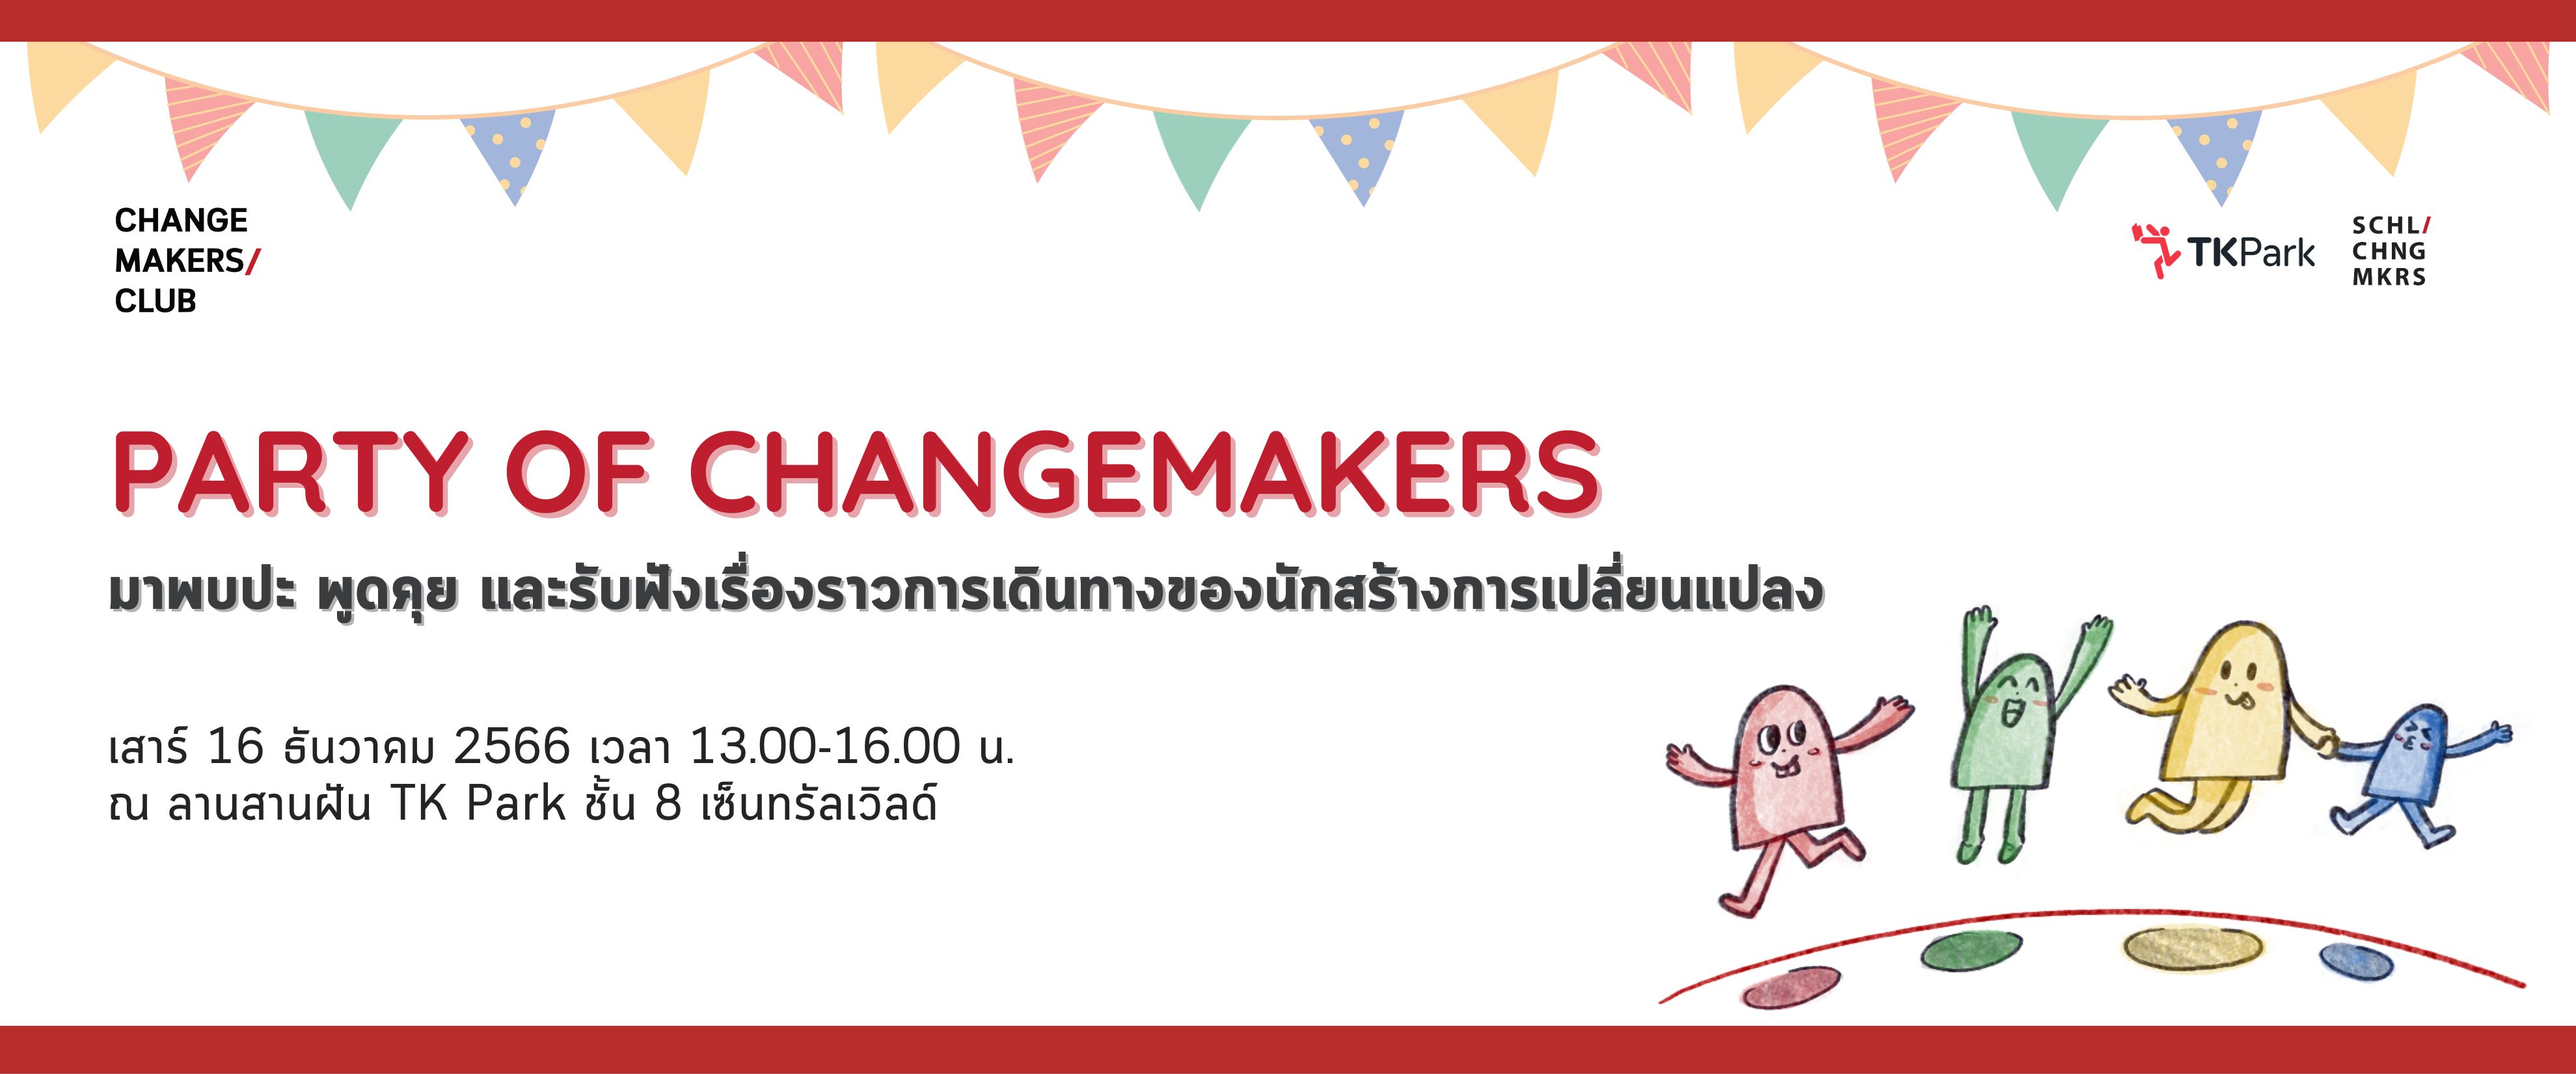 Web-Banner---Party-of-Changemakers.jpg